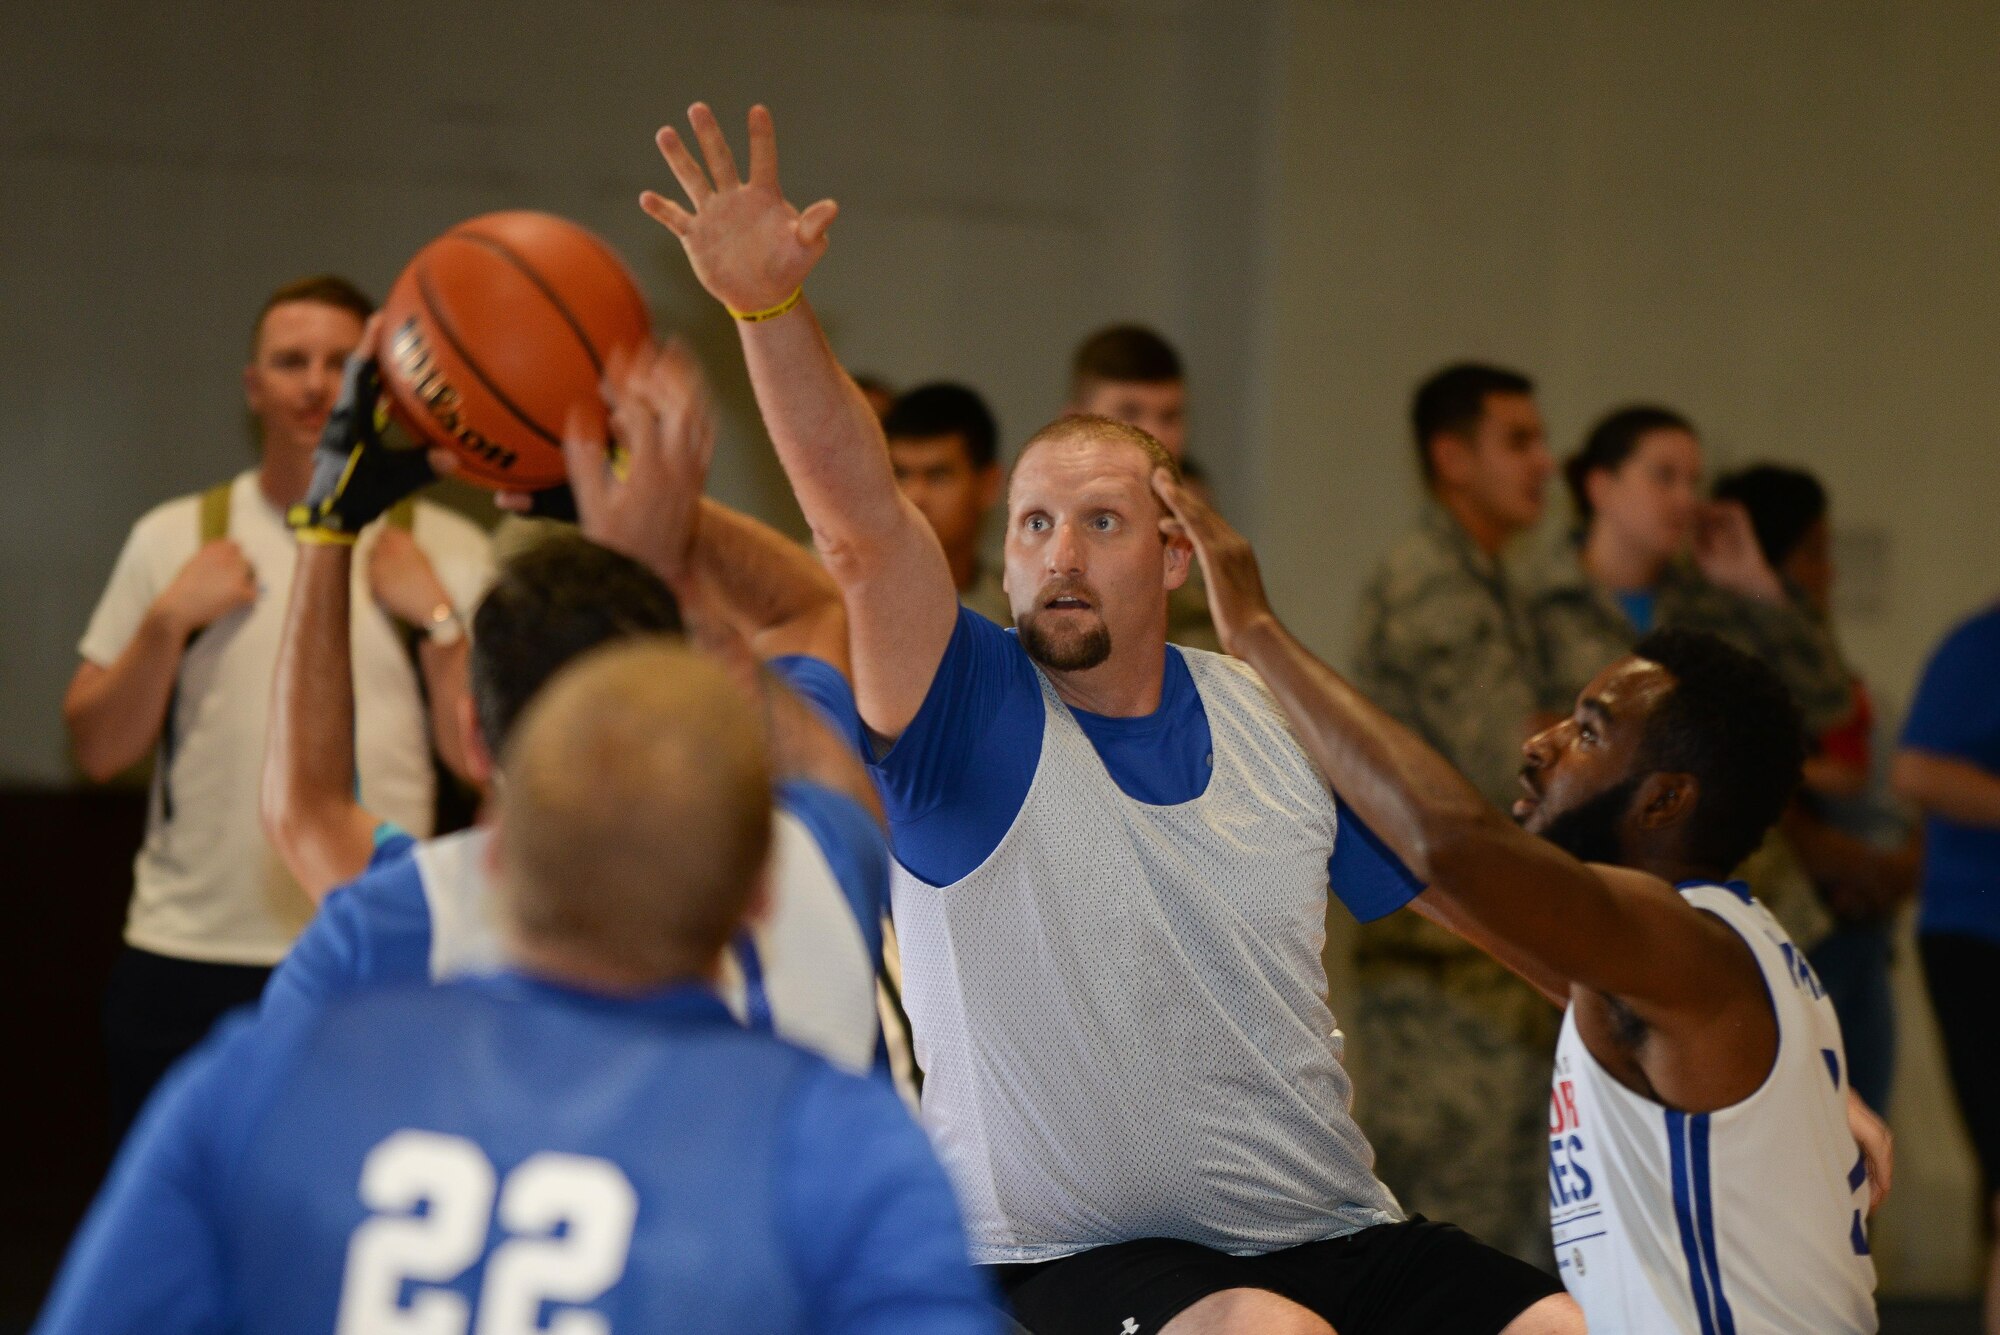 Tech. Sgt. (Ret.) Ben Clark, a warrior with the Air Force Wounded Warrior CARE Event at Offutt Air Force Base, Nebraska, competes in wheelchair basketball at the Offutt Field House Aug. 4, 2017. Clark was medically retired from the Air Force due to injuries sustained in a 2009 deployment to Iraq.